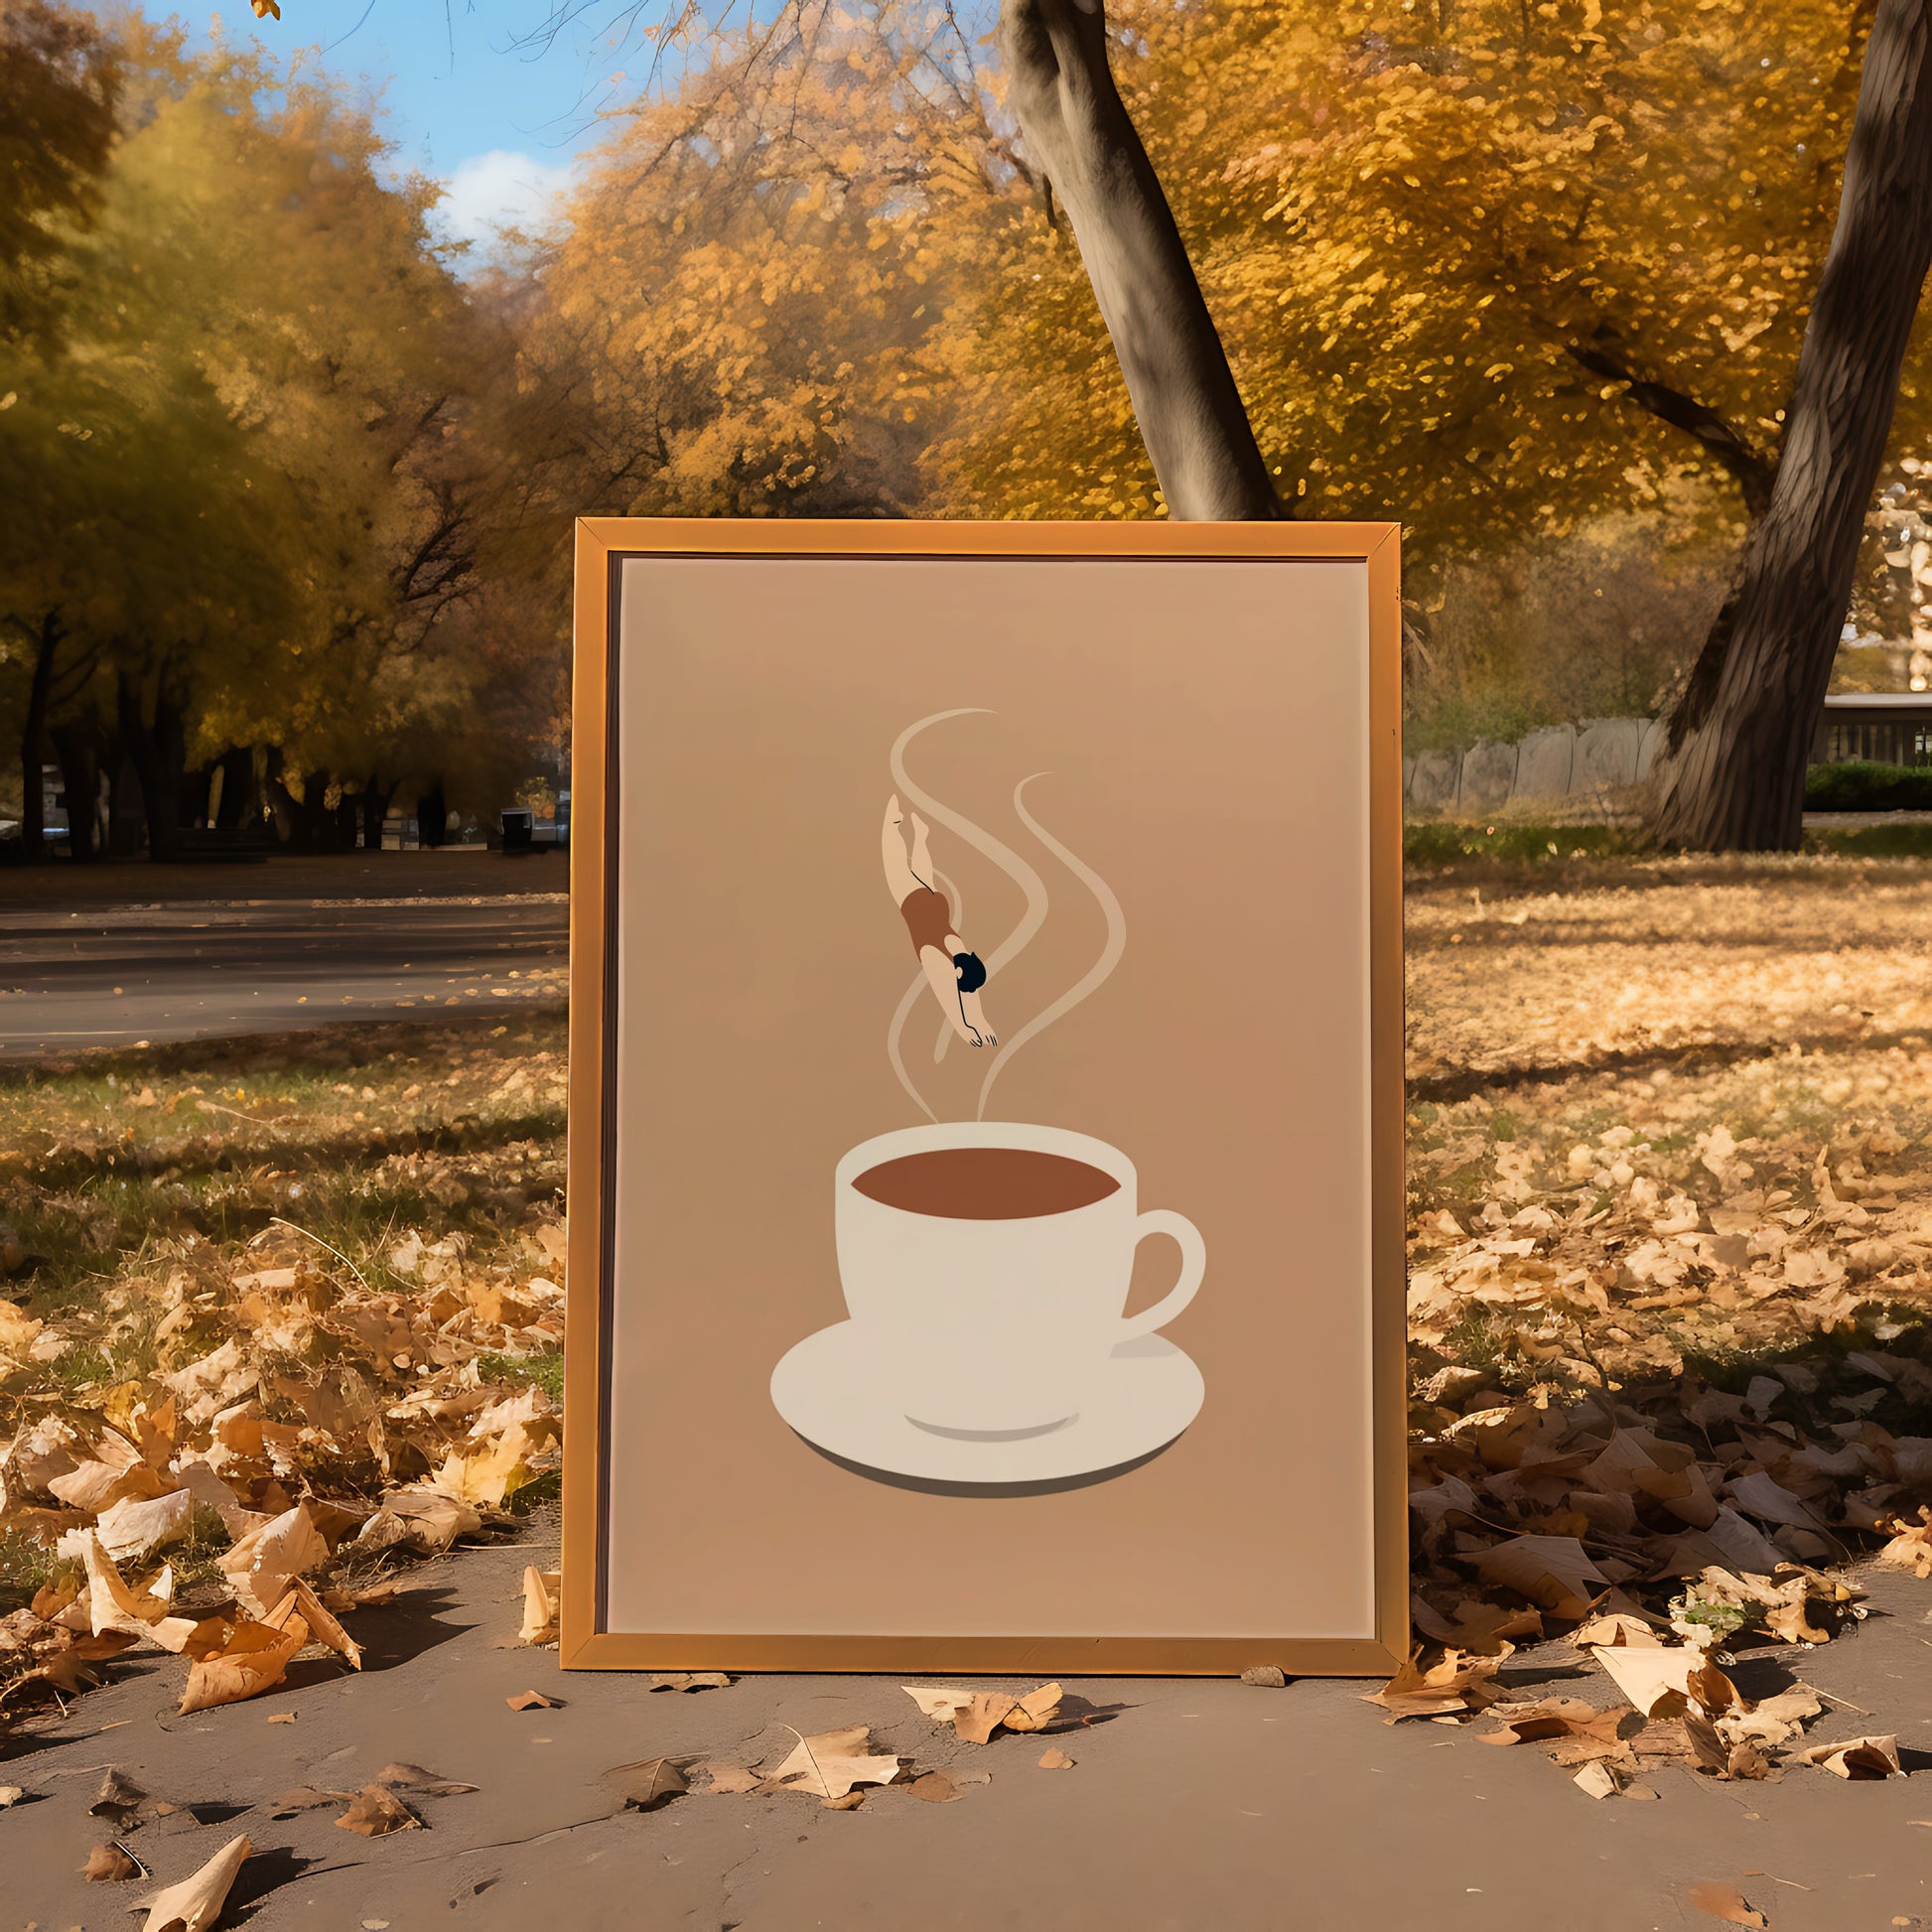 A sidewalk sign with a coffee cup illustration, surrounded by autumn leaves.